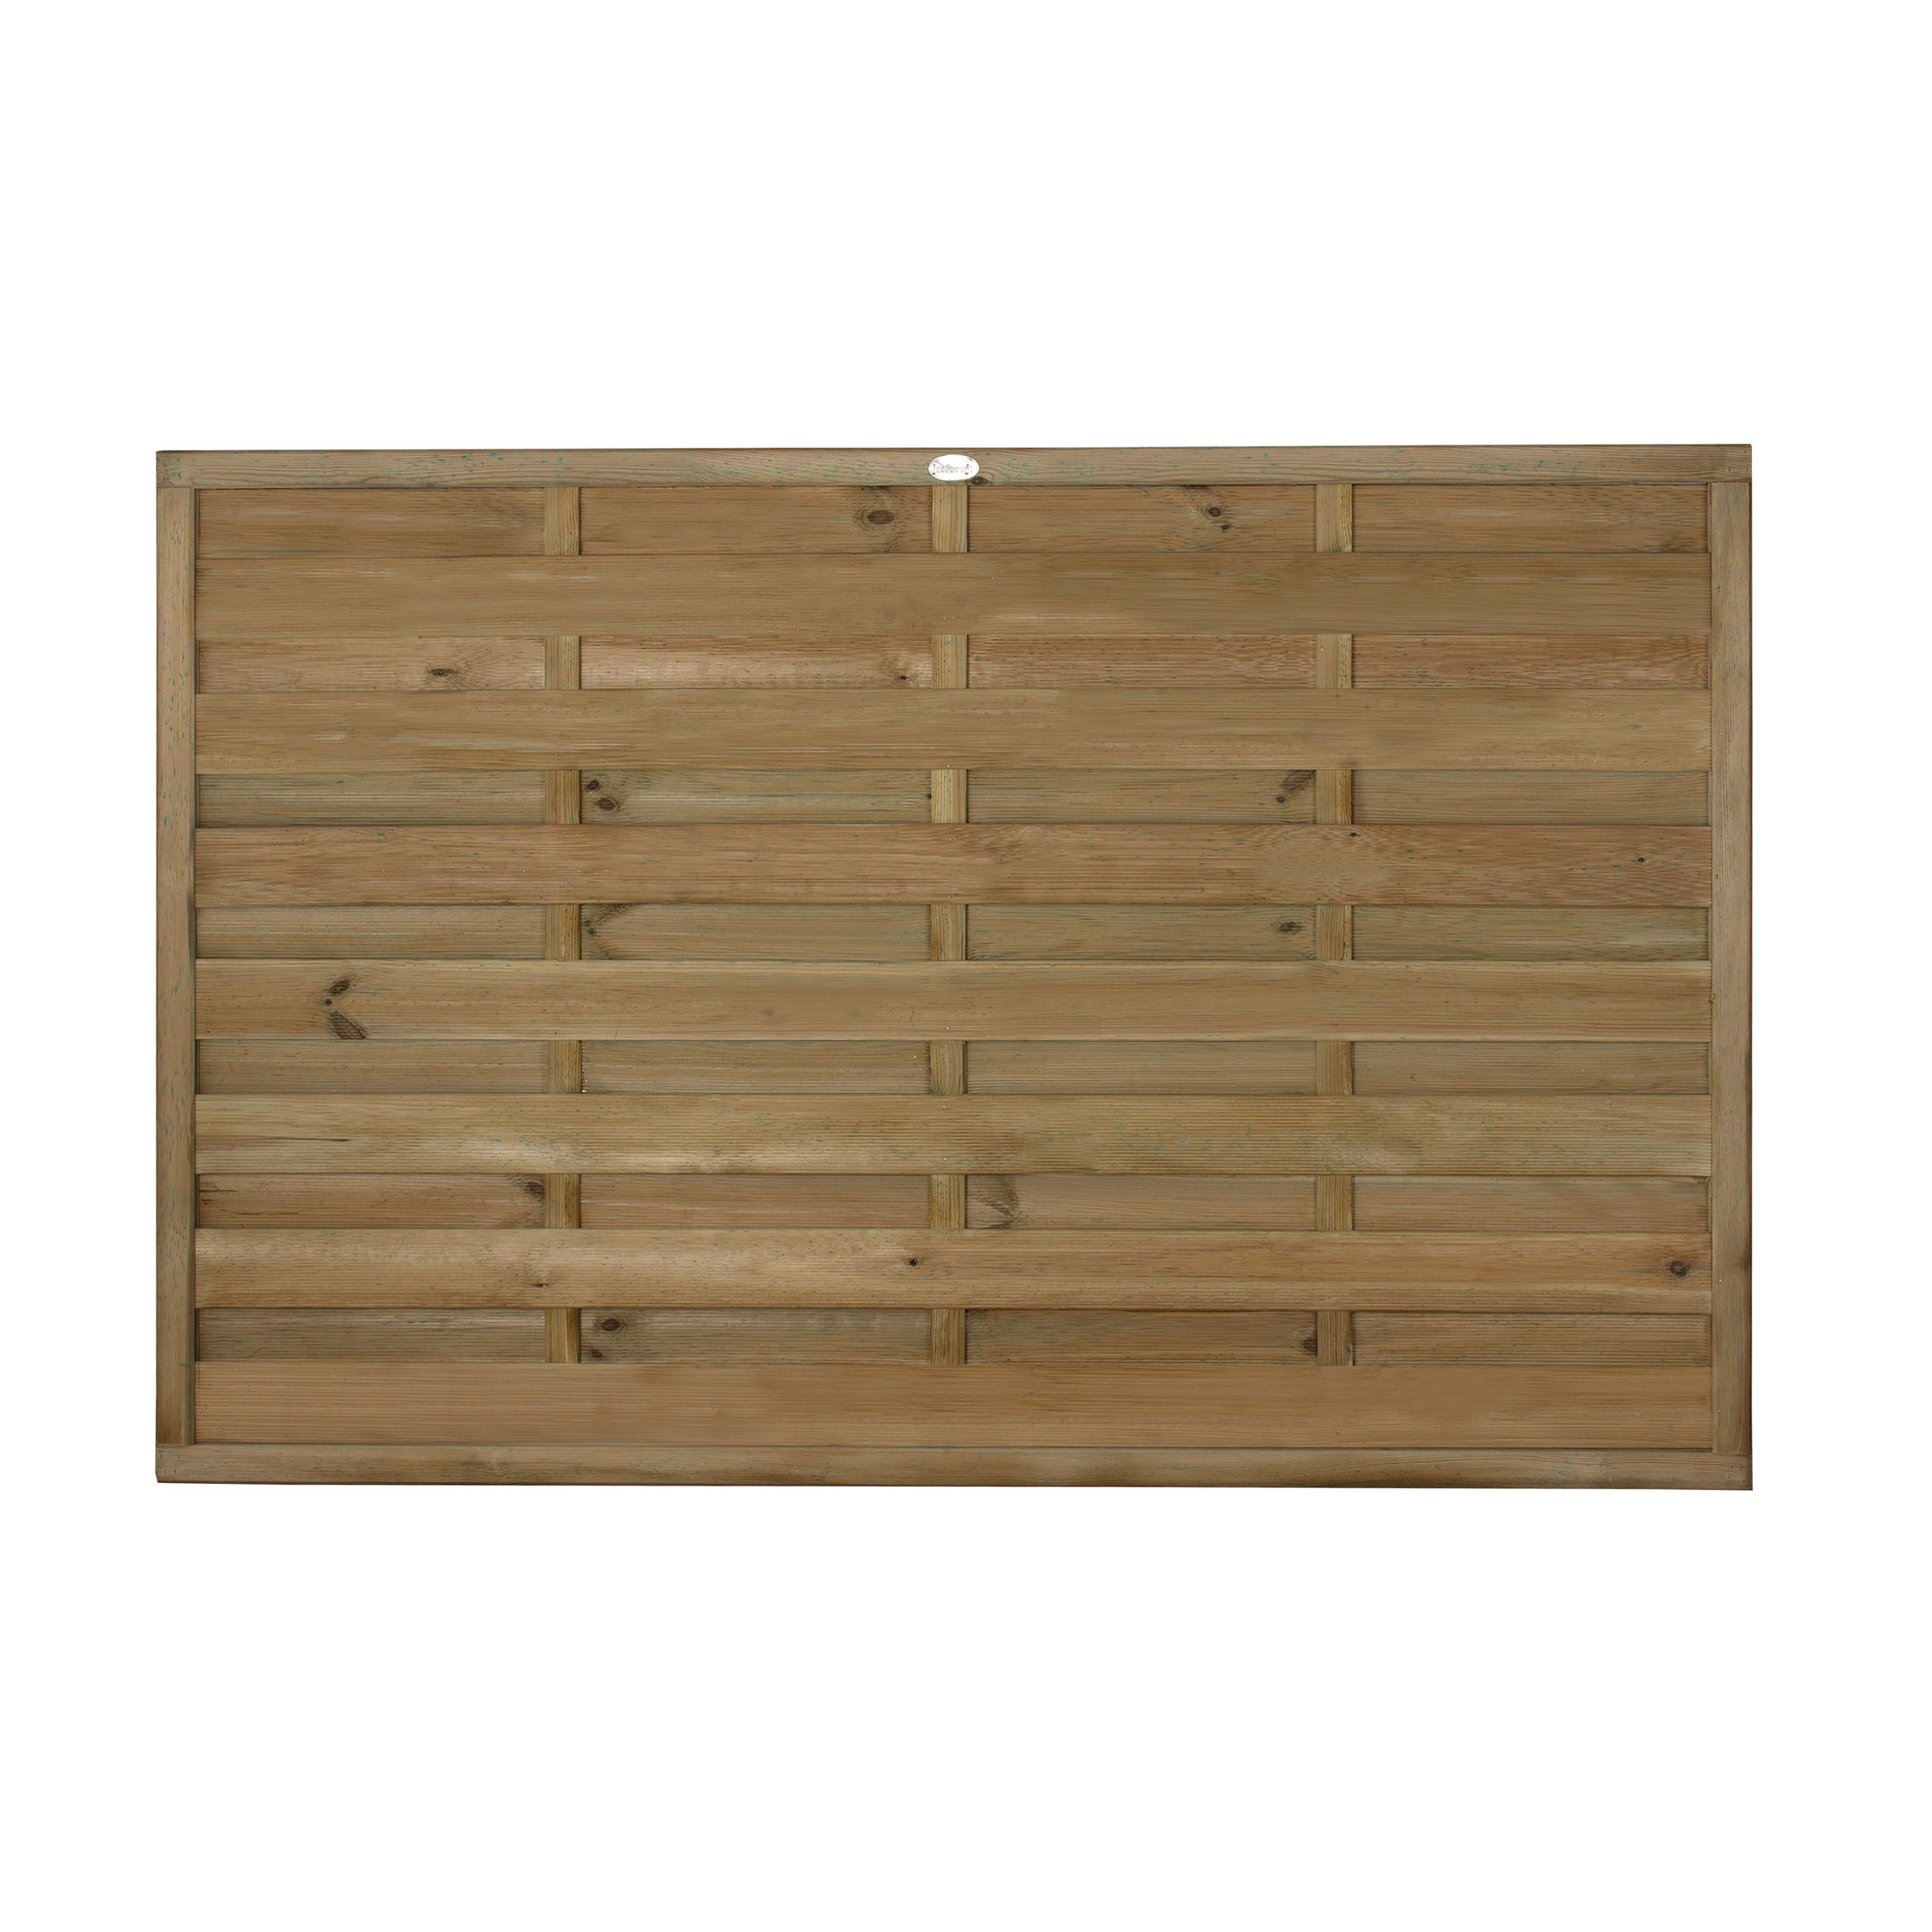 Image of Forest Garden Pressure Treated Horizontal Hit & Miss Fence Panel - 1800 x 1200mm - 6 x 4ft - Pack of 5